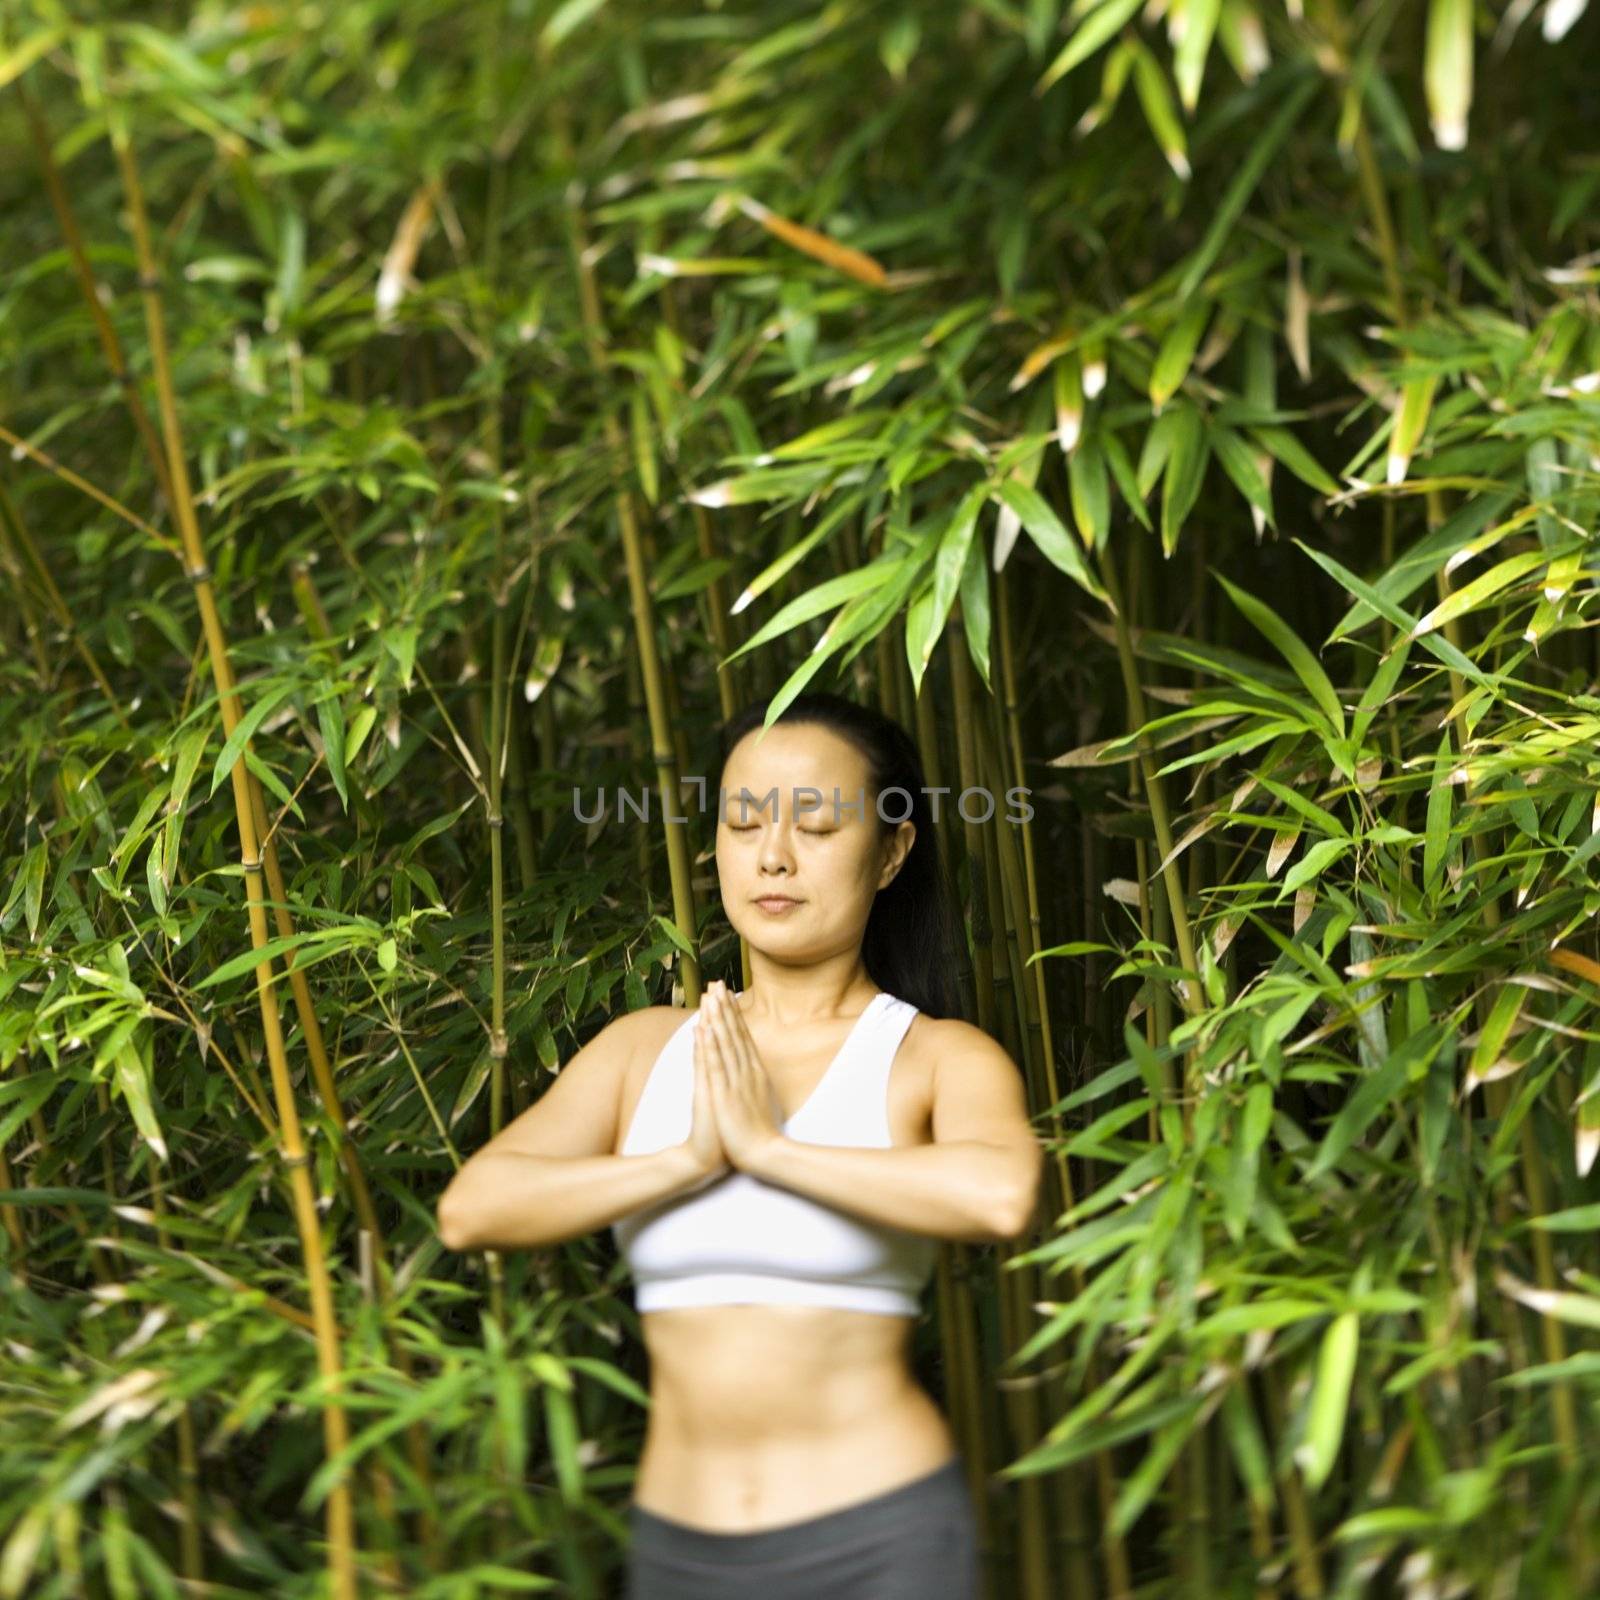 Half length portrait of Asian American woman in fitness attire standing in yoga position in bamboo forest in Maui, Hawaii.